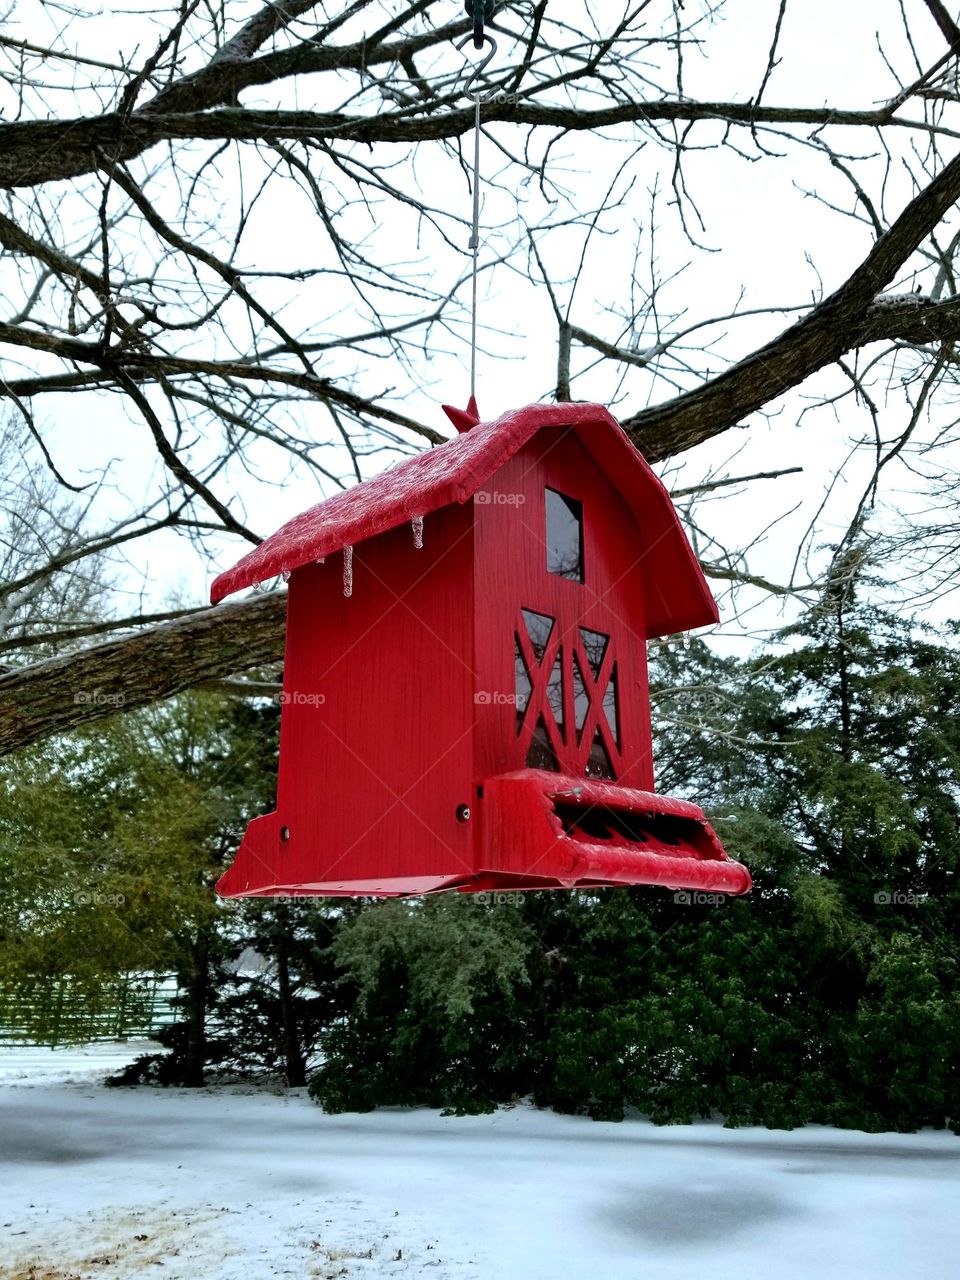 Frozen Red Barn Bird feeder with icicles on it